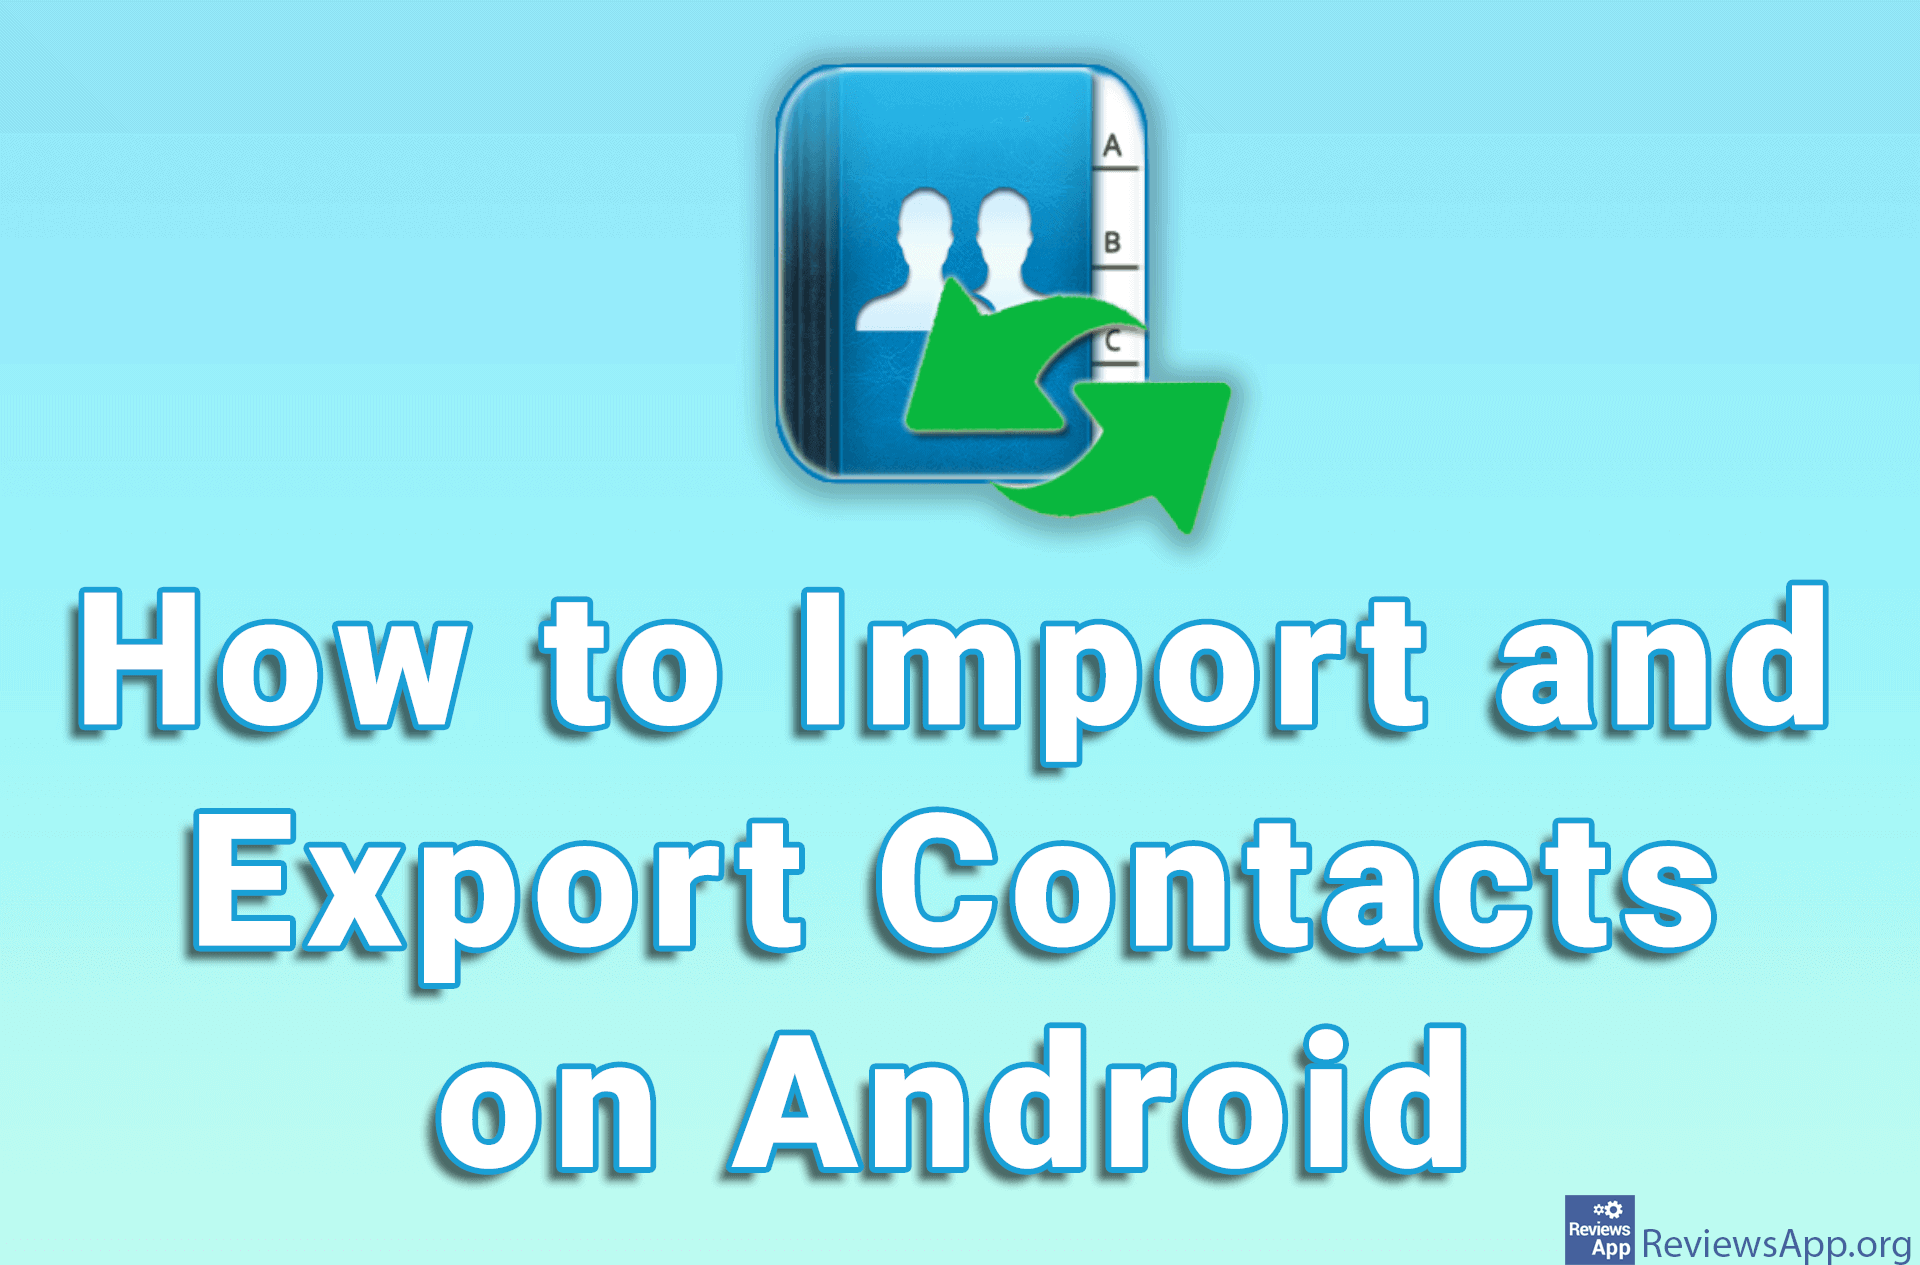 How to Import and Export Contacts on Android